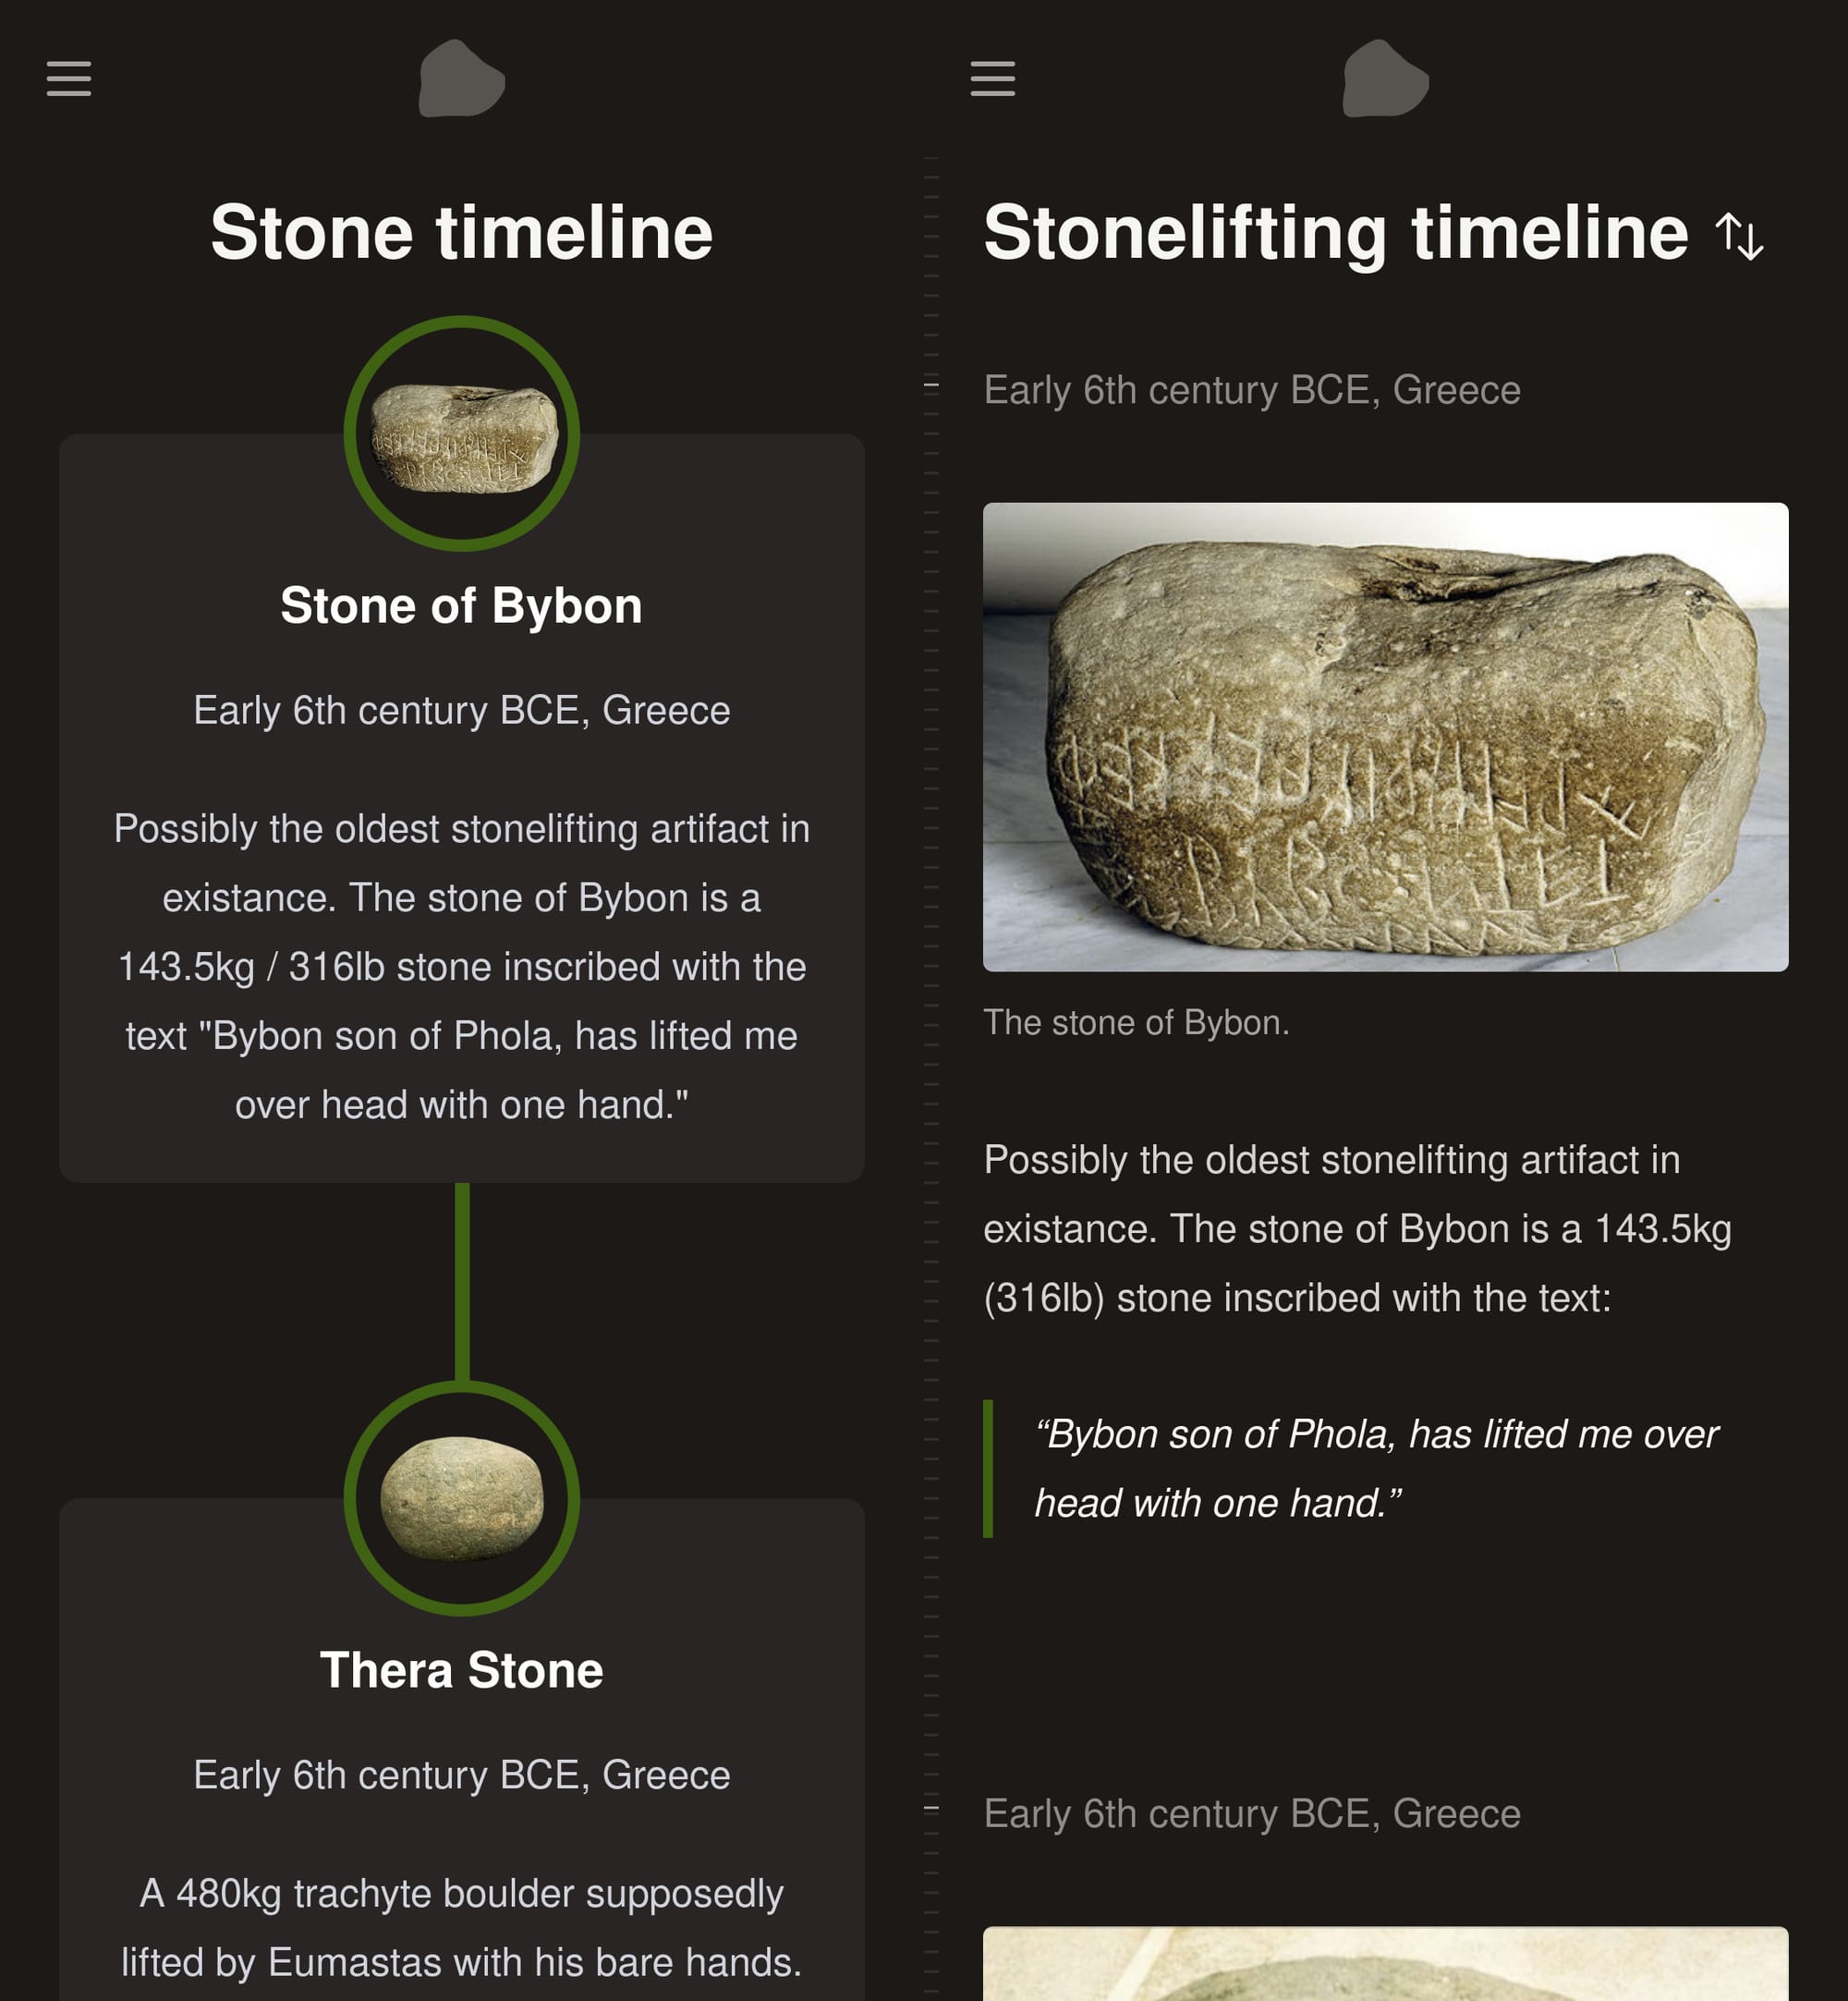 On the 'before' side, there's a stonelifting timeline featuring large grey cards filled with stone information. At the top of the card, there's a small green circle with a small image of a stone. At the bottom of the card, there's a green line connecting it to the next element. On the 'after' side, the redesigned timeline shows larger images of the stones with text formatted in a more hierarchical fashion. The flow of time is represented by markers inspired by minute and hour markers on a watch.  